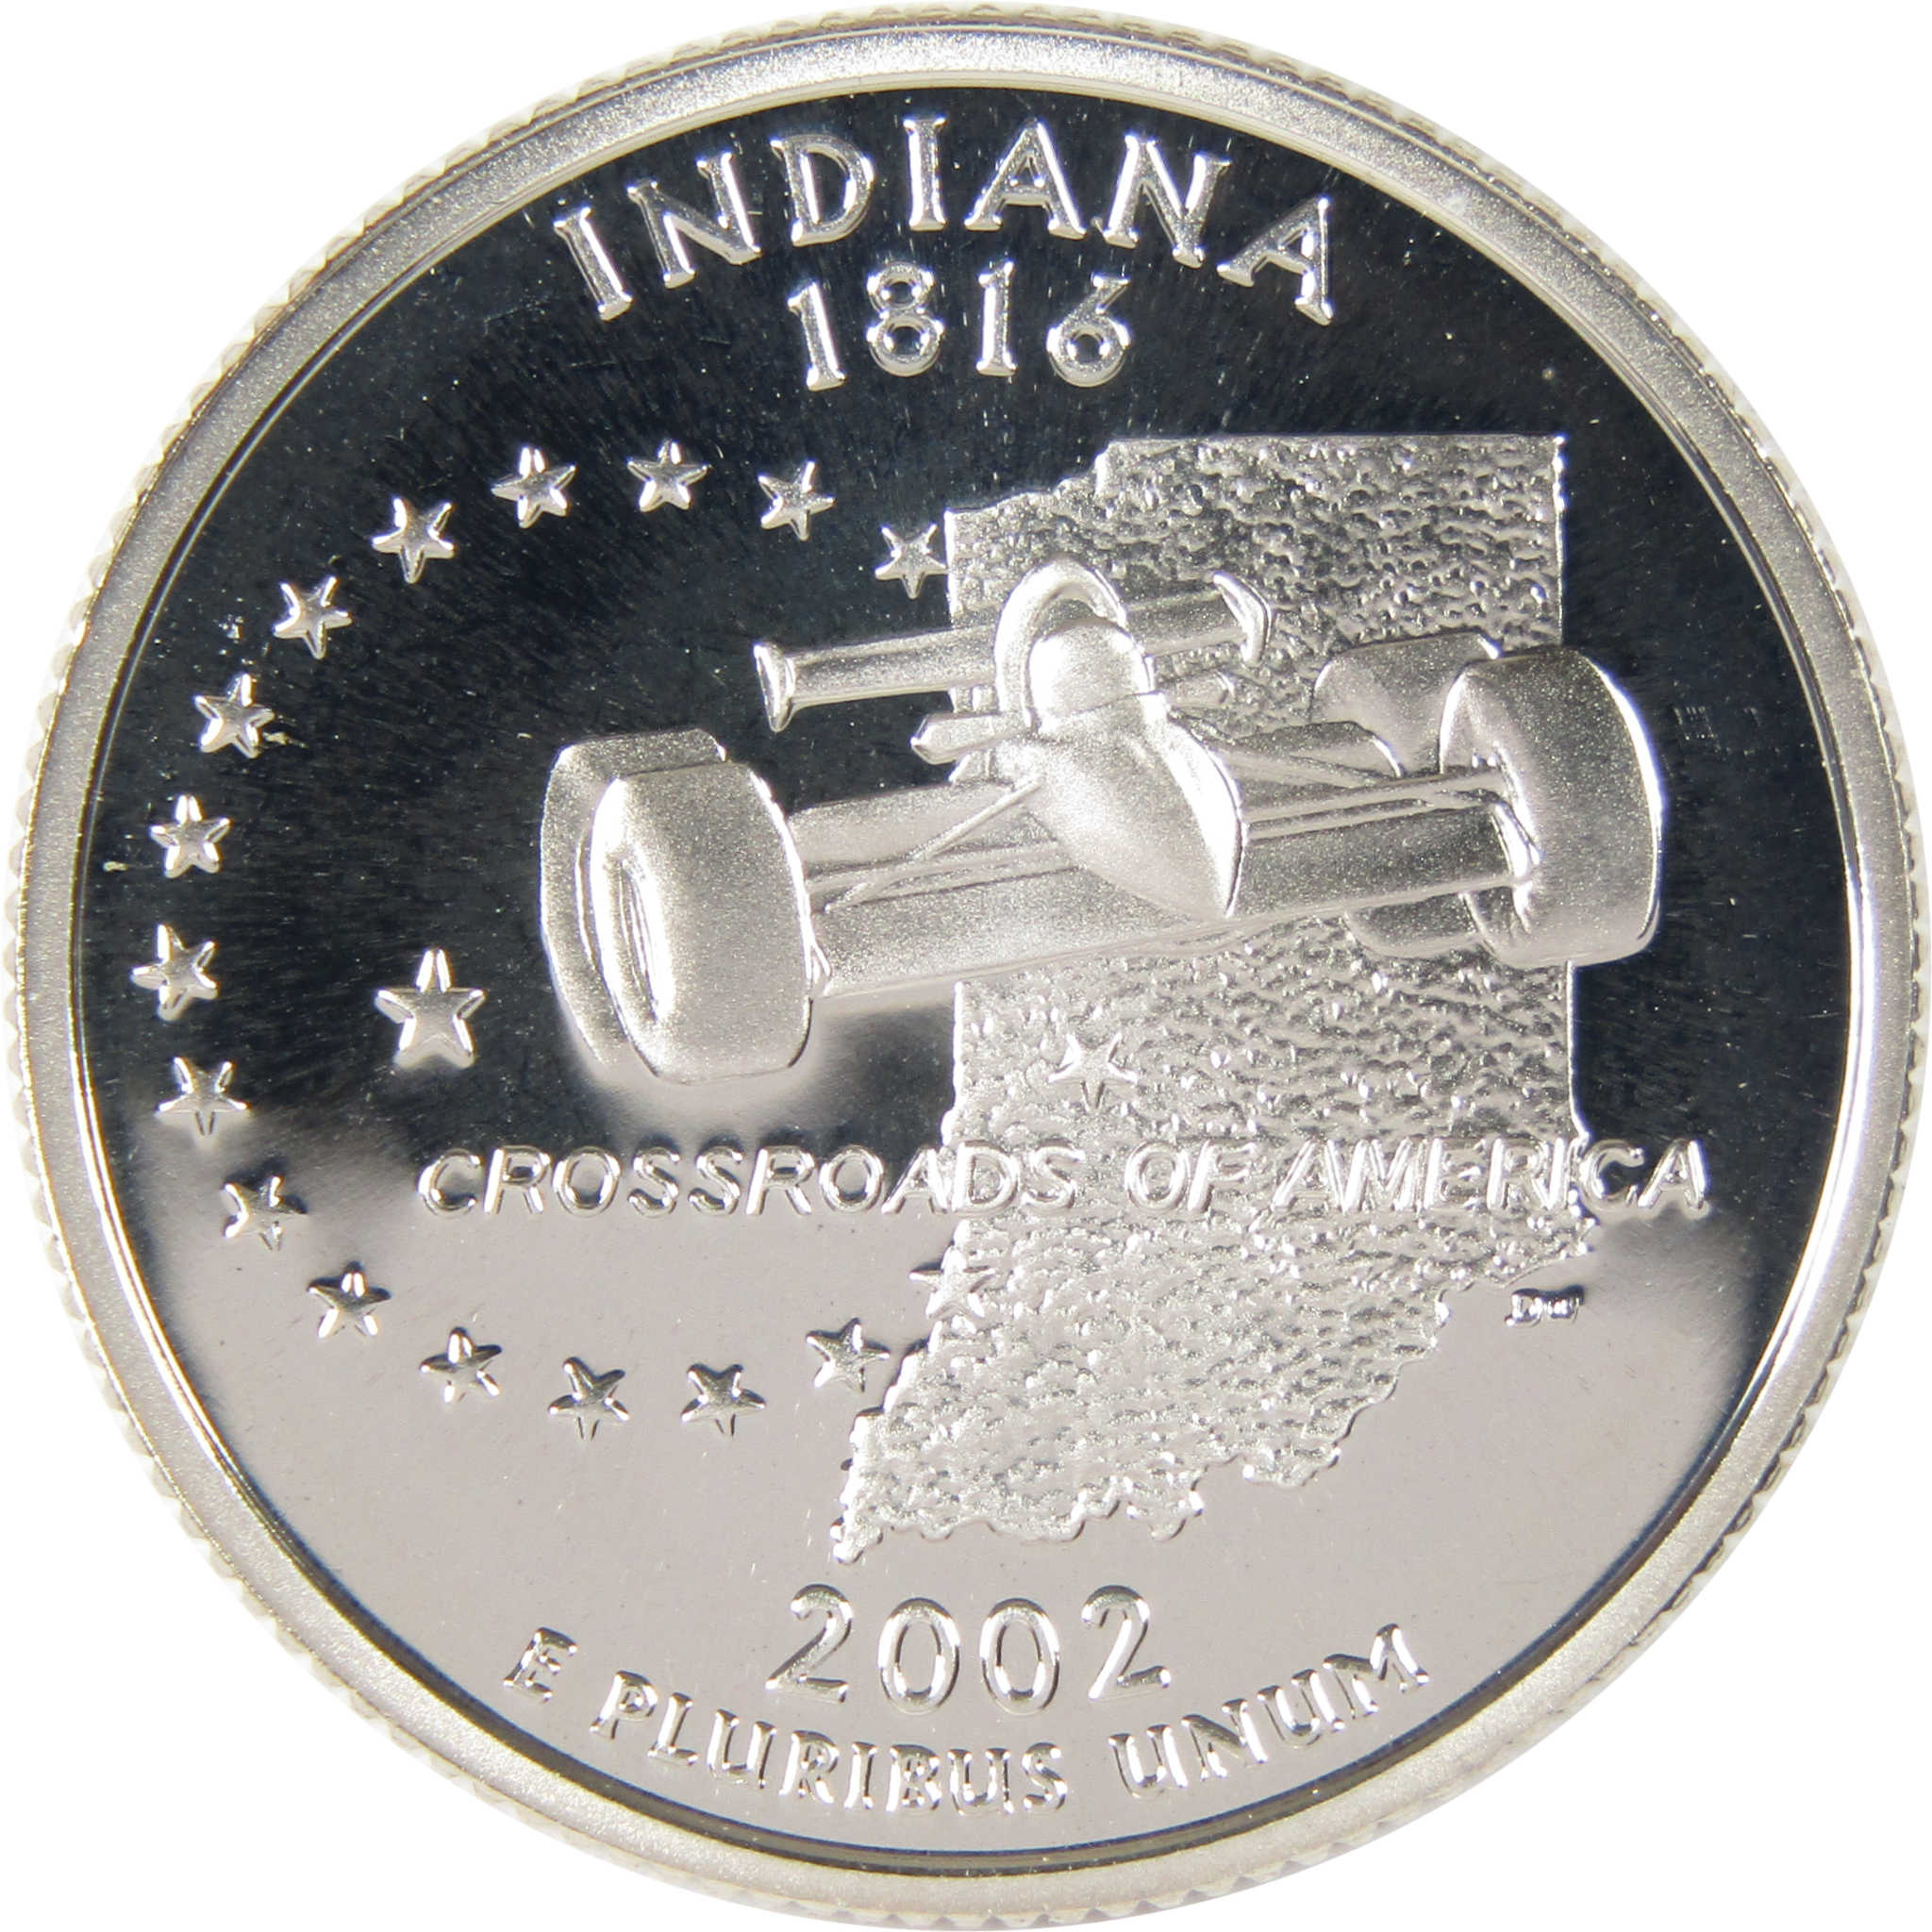 2002 S Indiana State Quarter Silver 25c Proof Coin